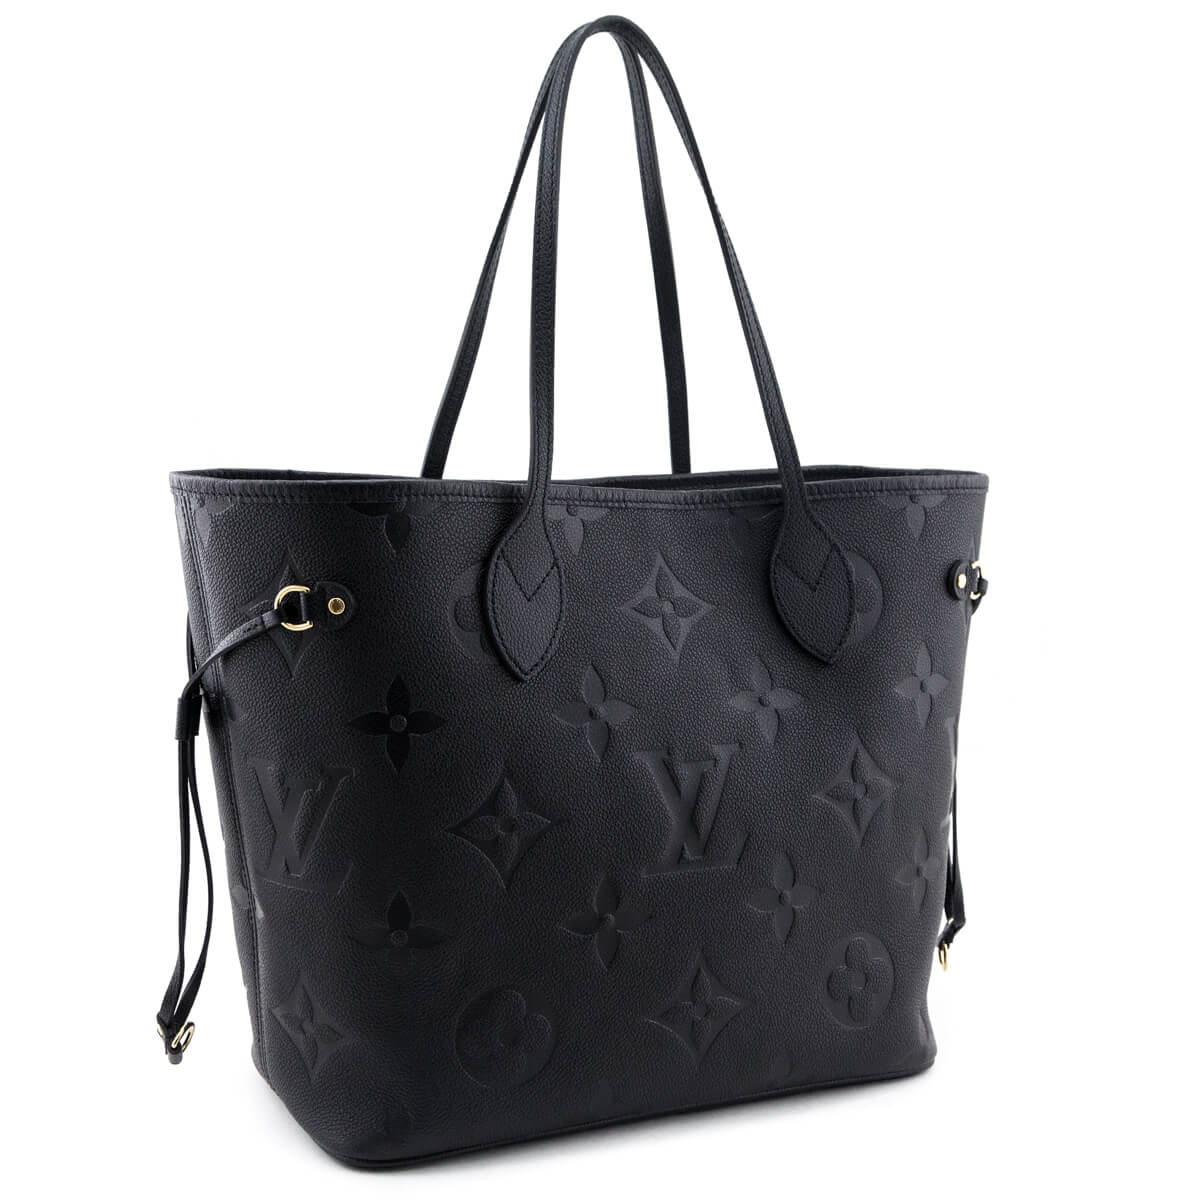  Pouch - Love that Bag etc - Preowned Authentic Designer Handbags & Preloved Fashions